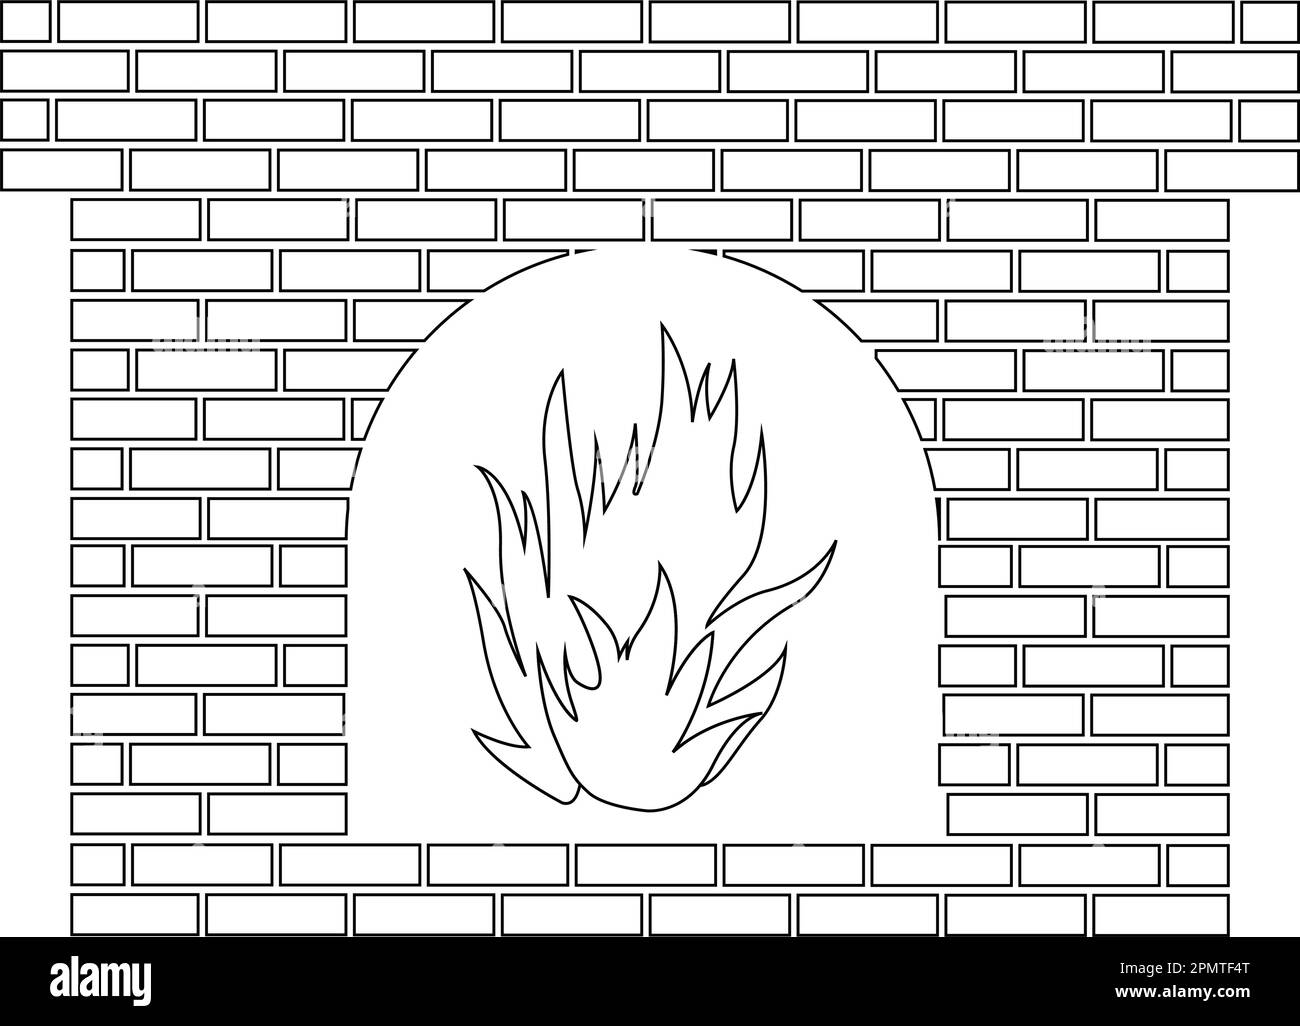 Fireplace silhouette stock vector images